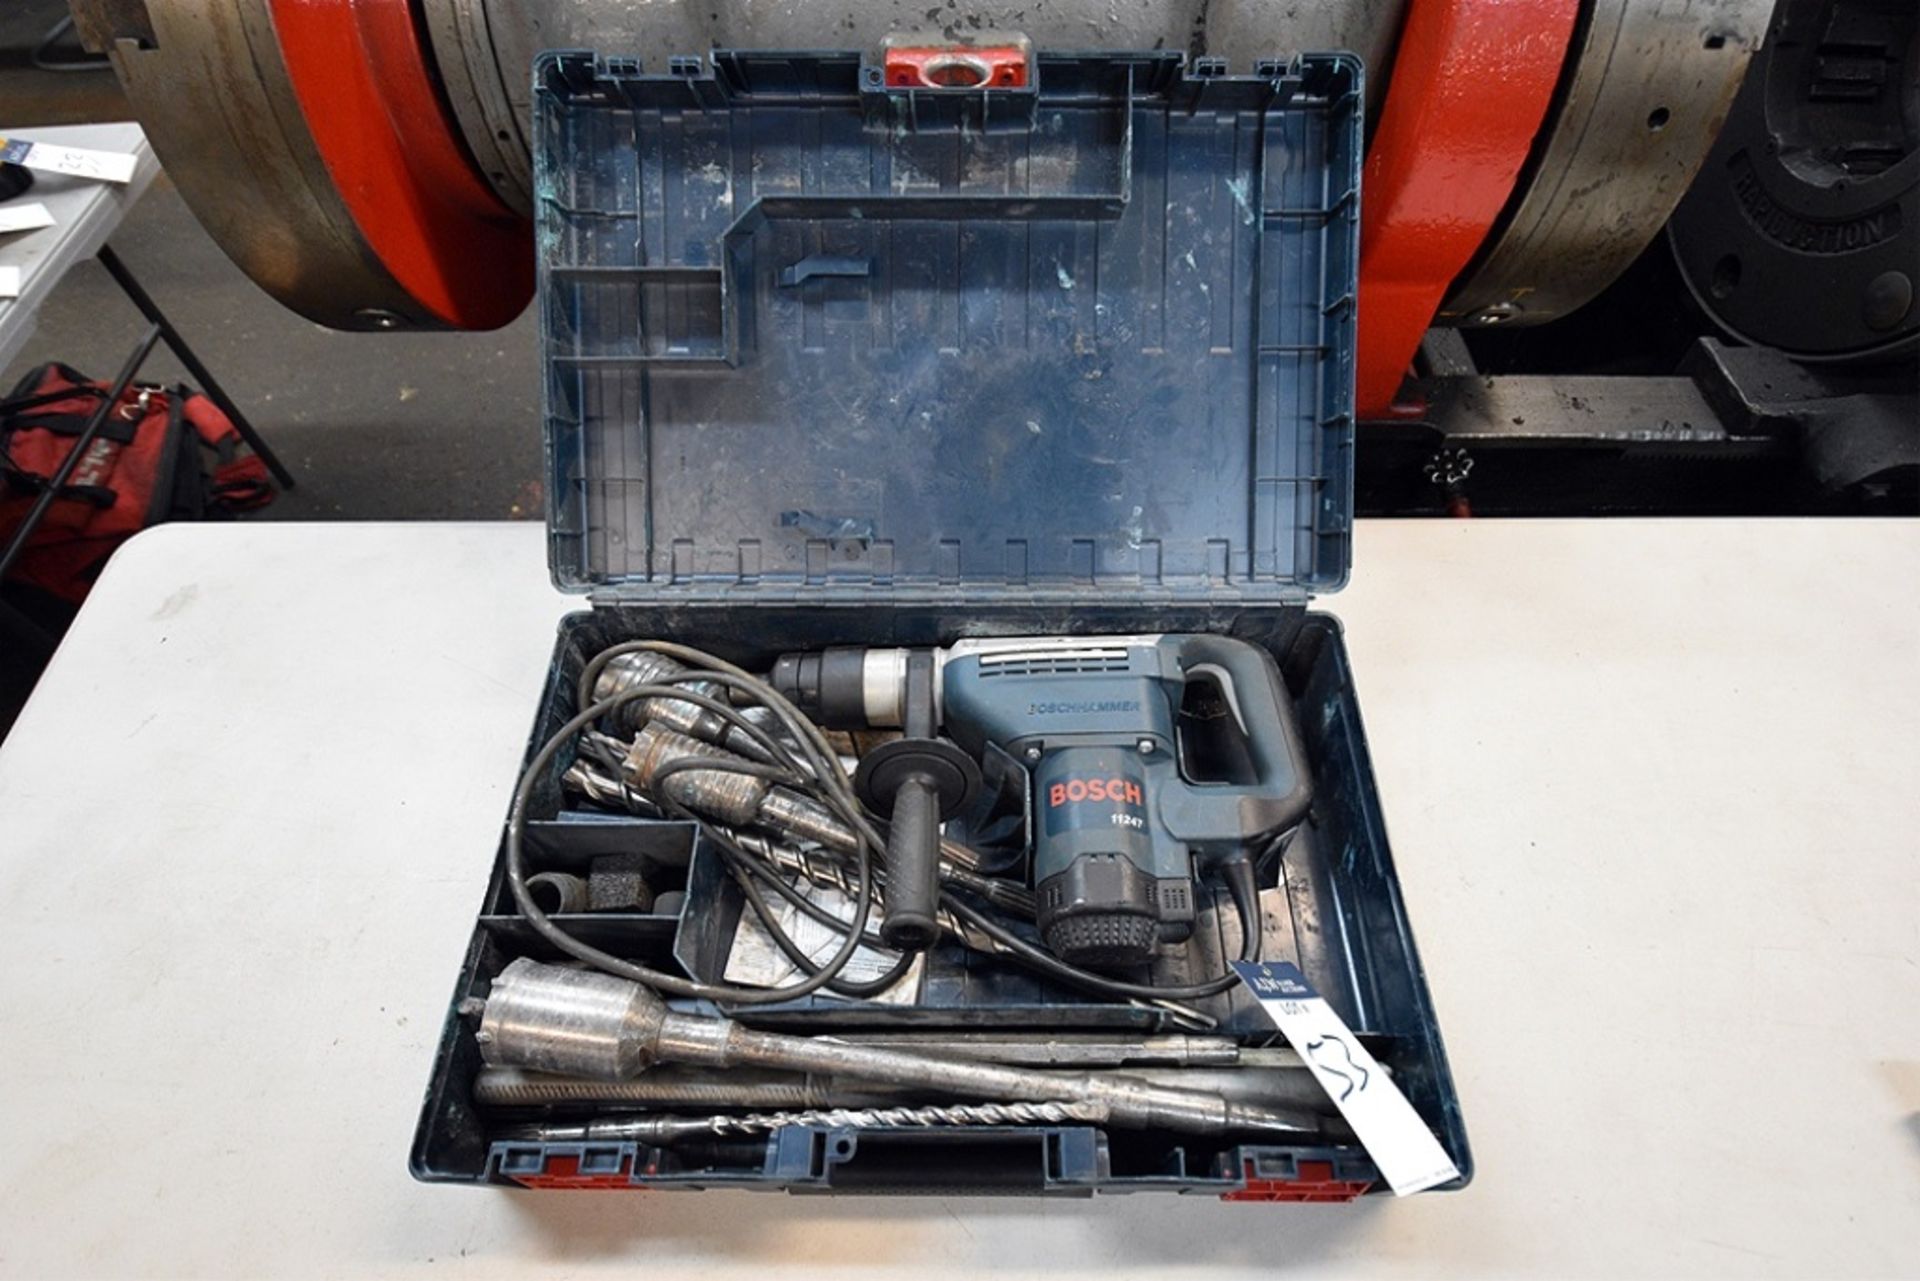 Bosch BoschHammer Model 11247 1-9/16" Corded Combination Hammer w/ Case and Bits - Image 2 of 4